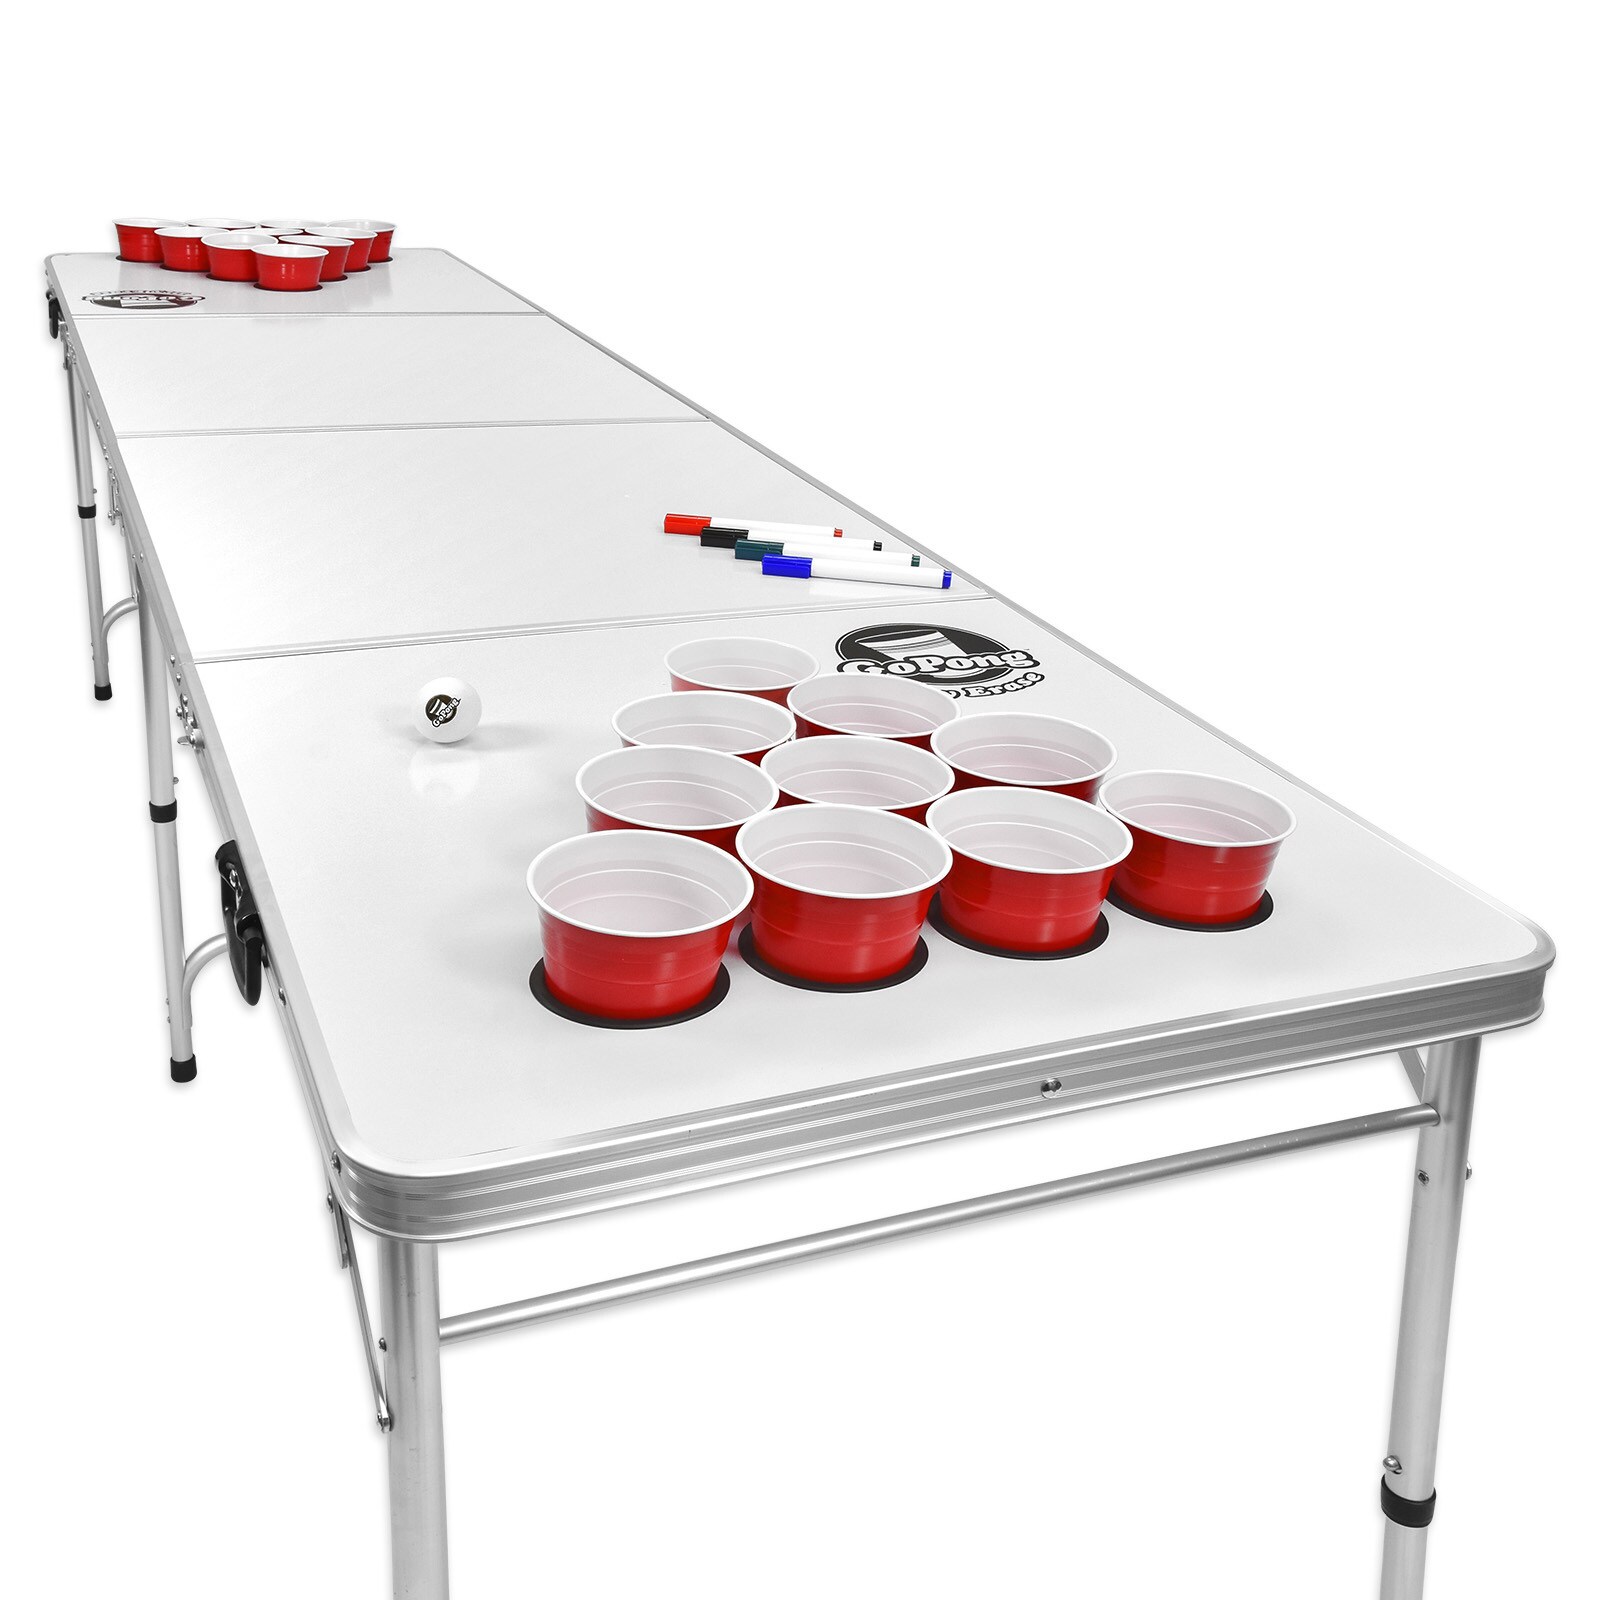 Beer Pong Table with Wood Print